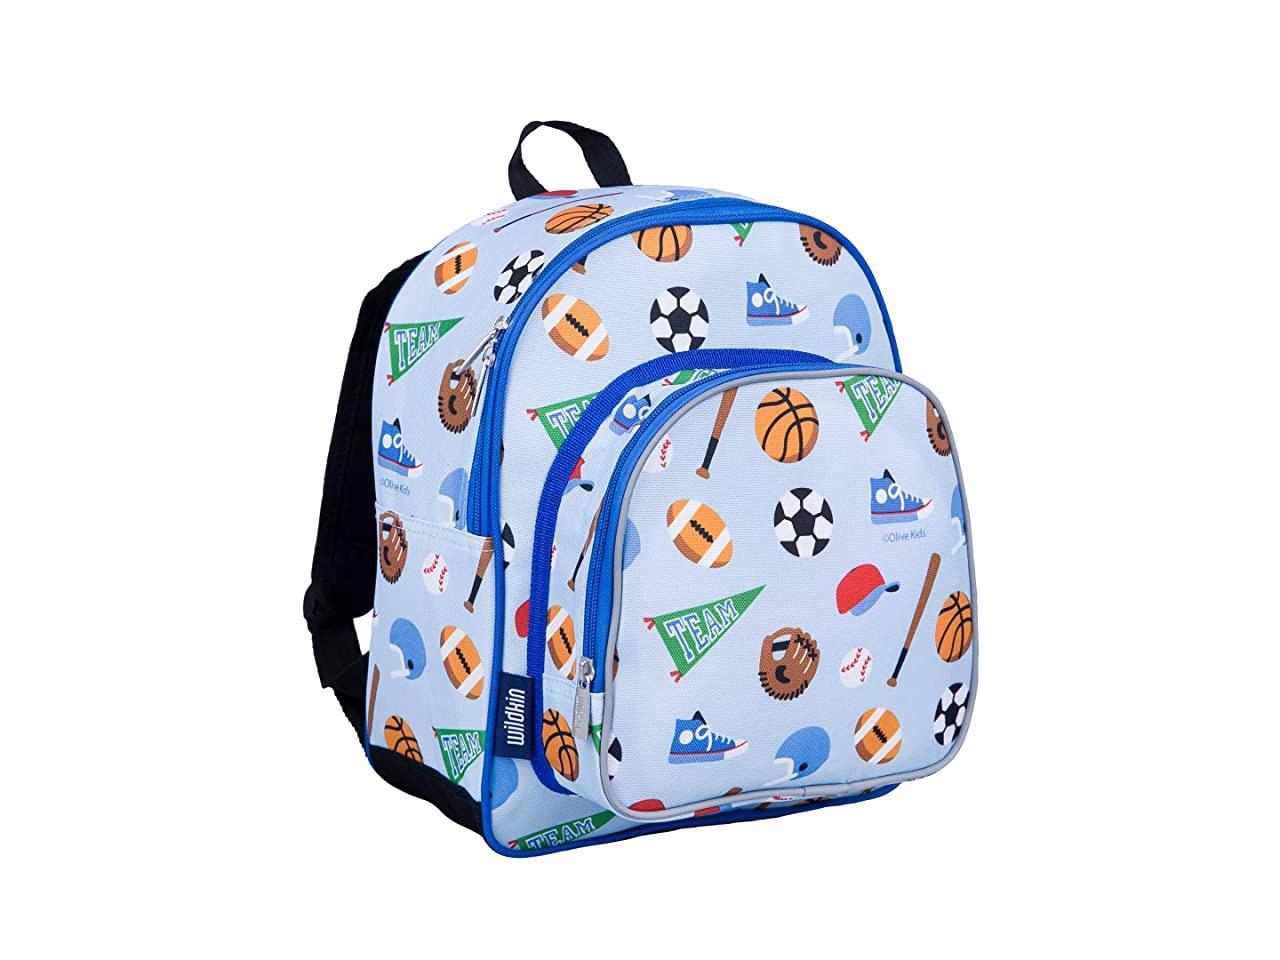 Boys and Girls Ideal for Daycare Preschool and Kindergarten Perfect Size for School and Travel Wildkin Backpack for Toddlers Game On Moms Choice Award Winner 